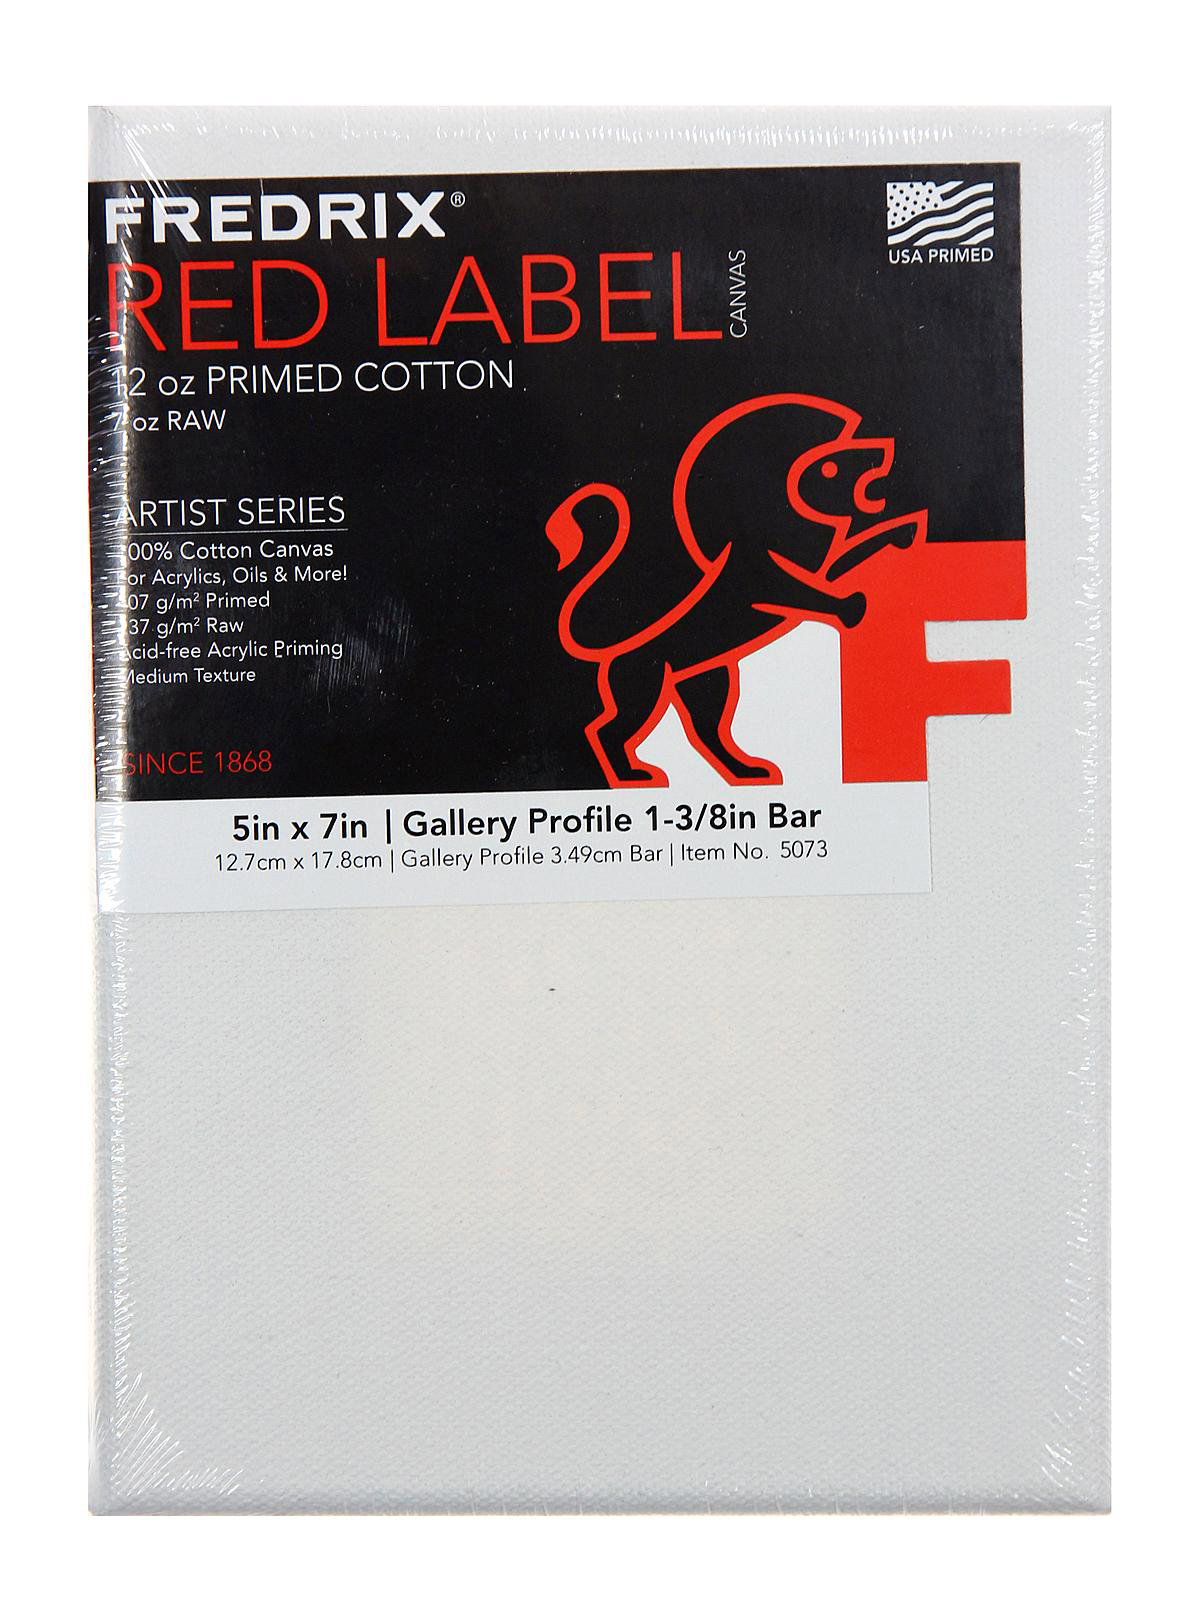 Fredrix red label 11” x 14” stretched artist Canvas